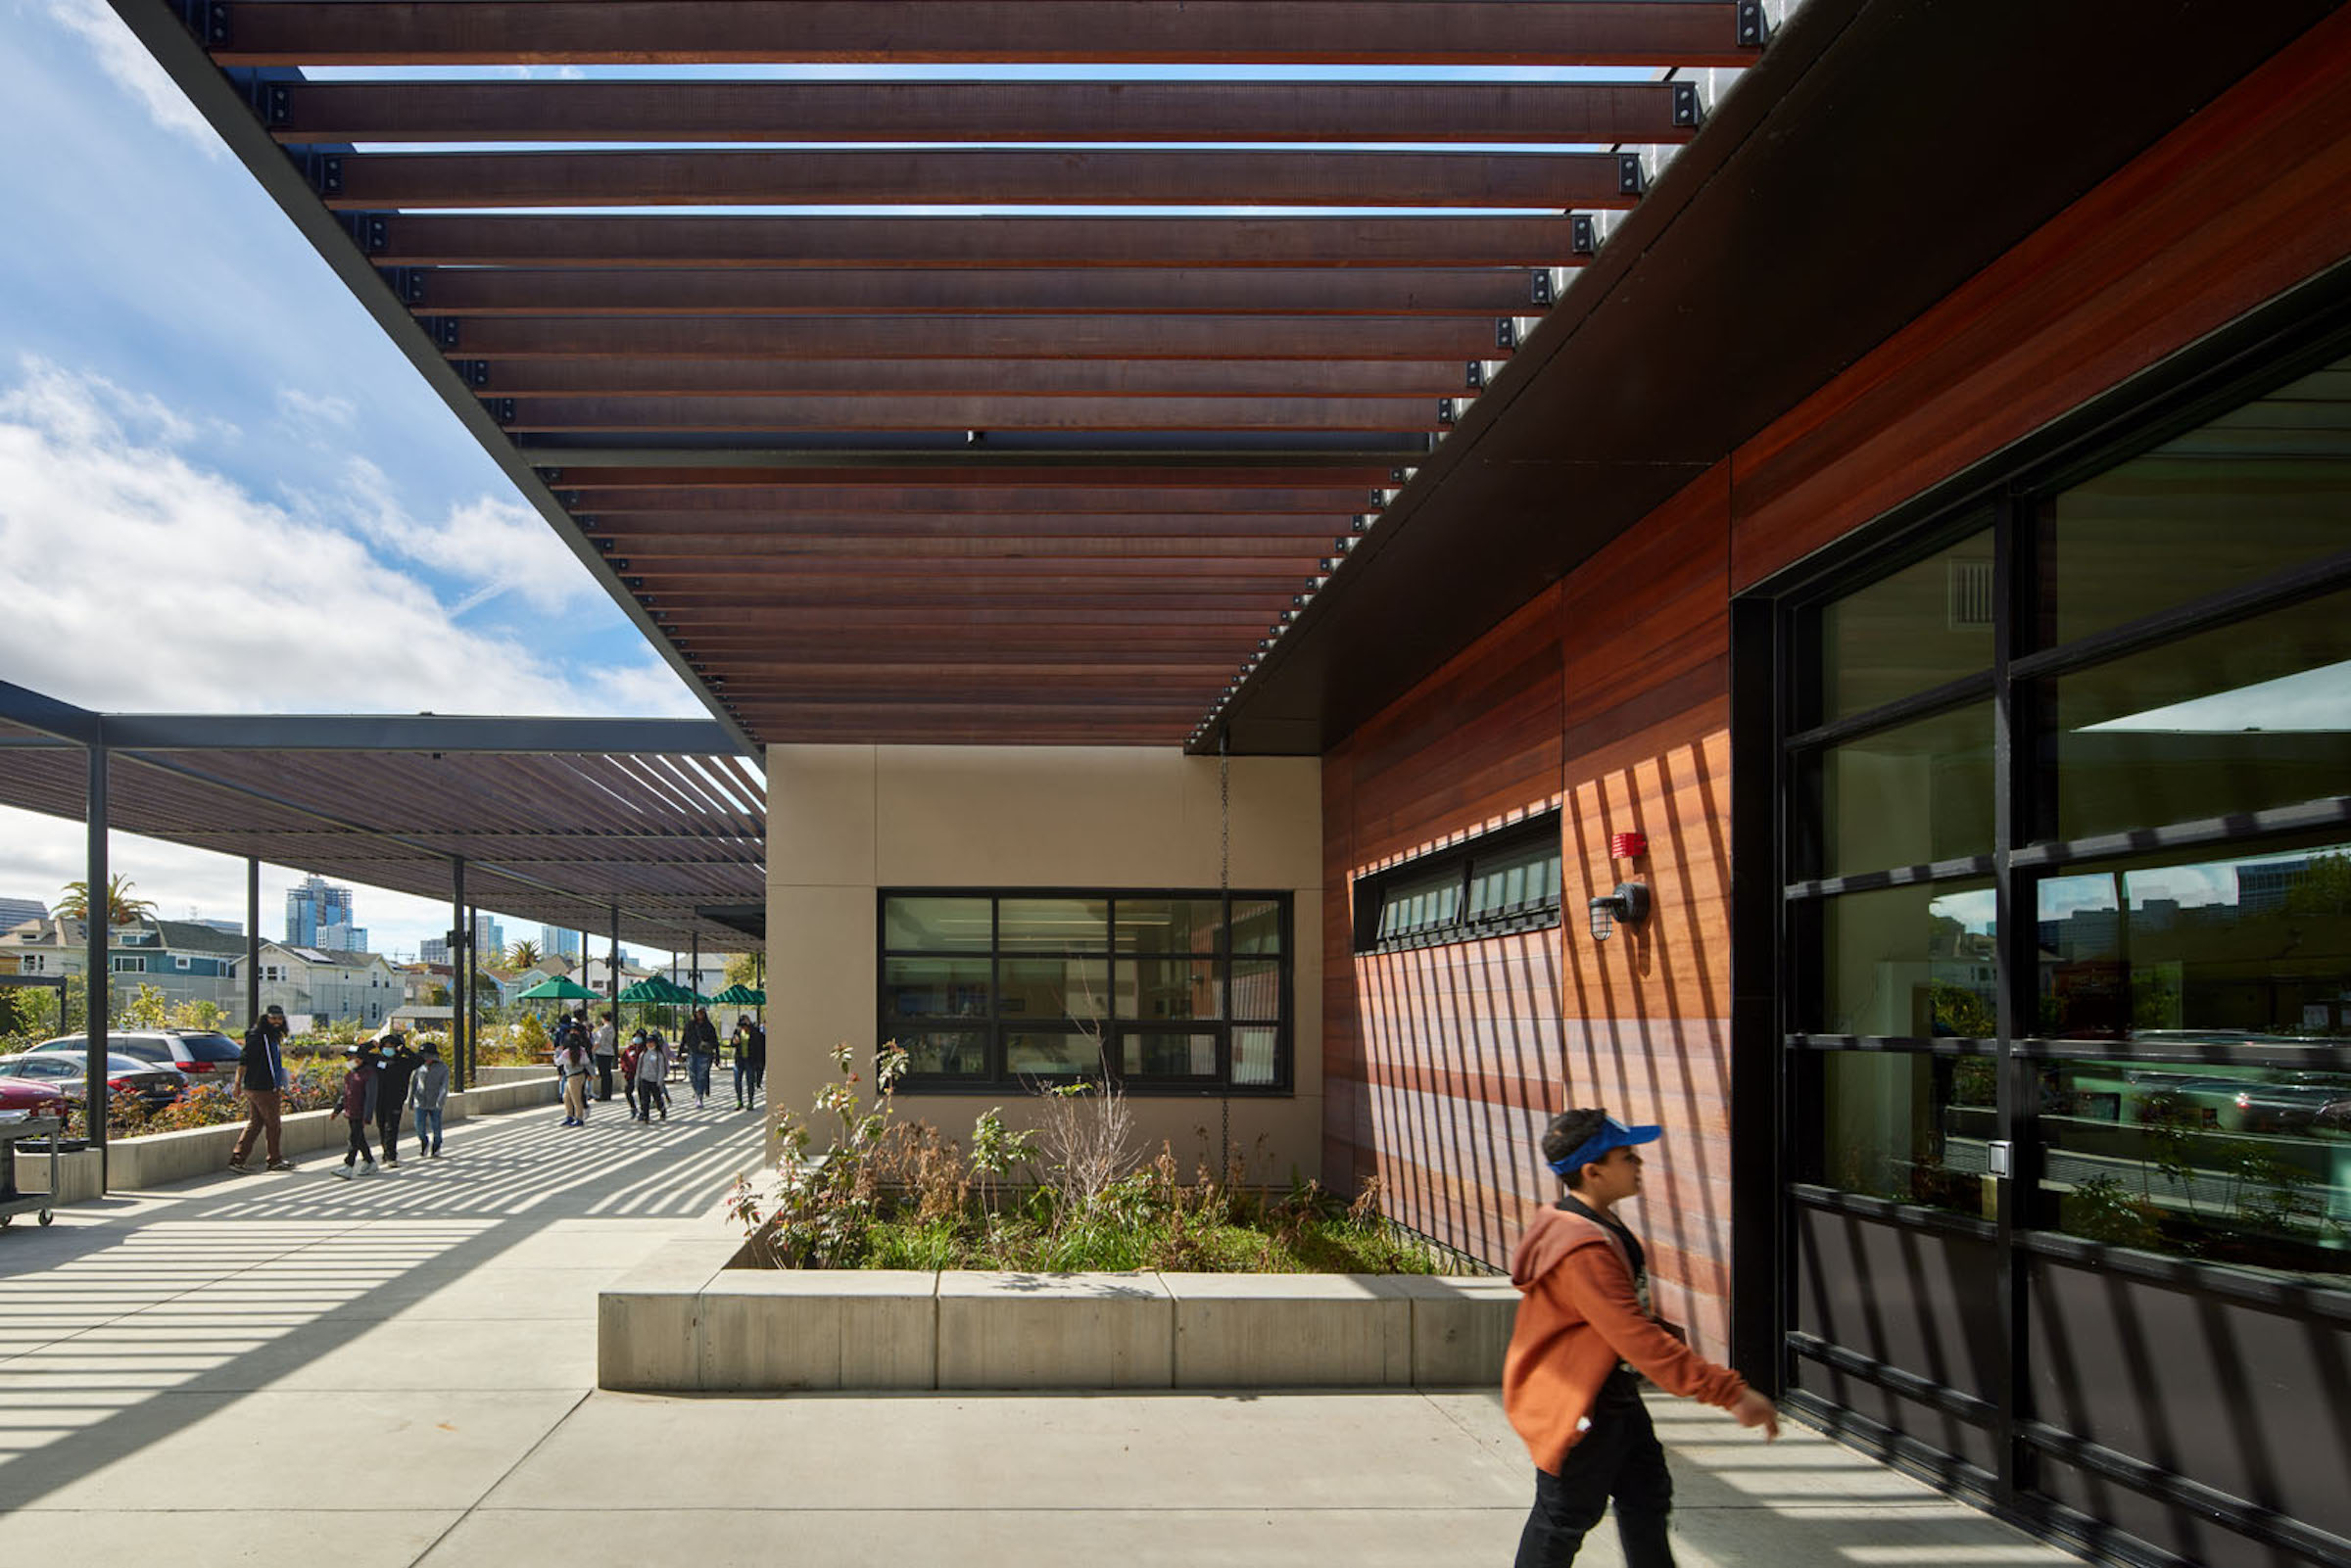 The Unified School District's central kitchen, learning farm and learning center were designed by CAW Architects